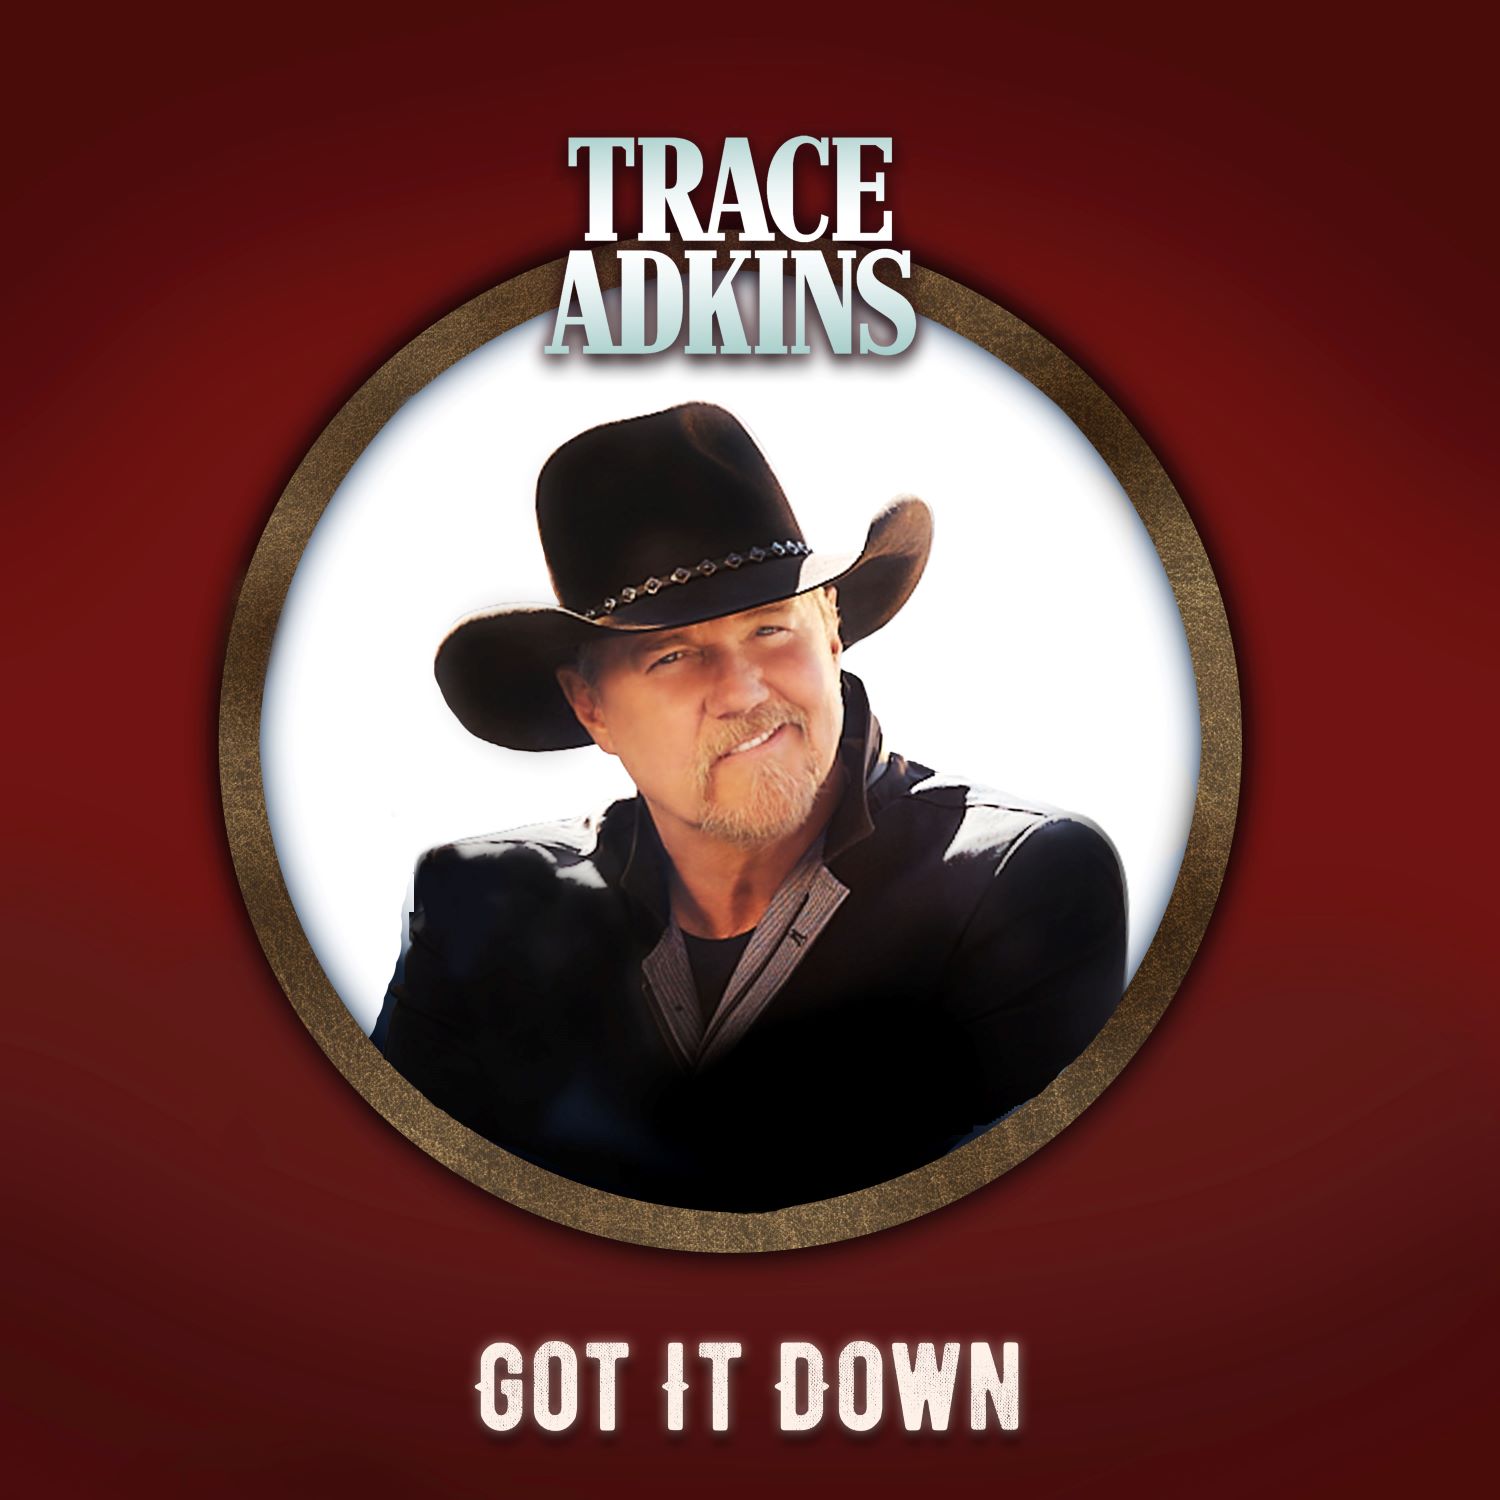 Trace Adkins headlines Country New Music Friday